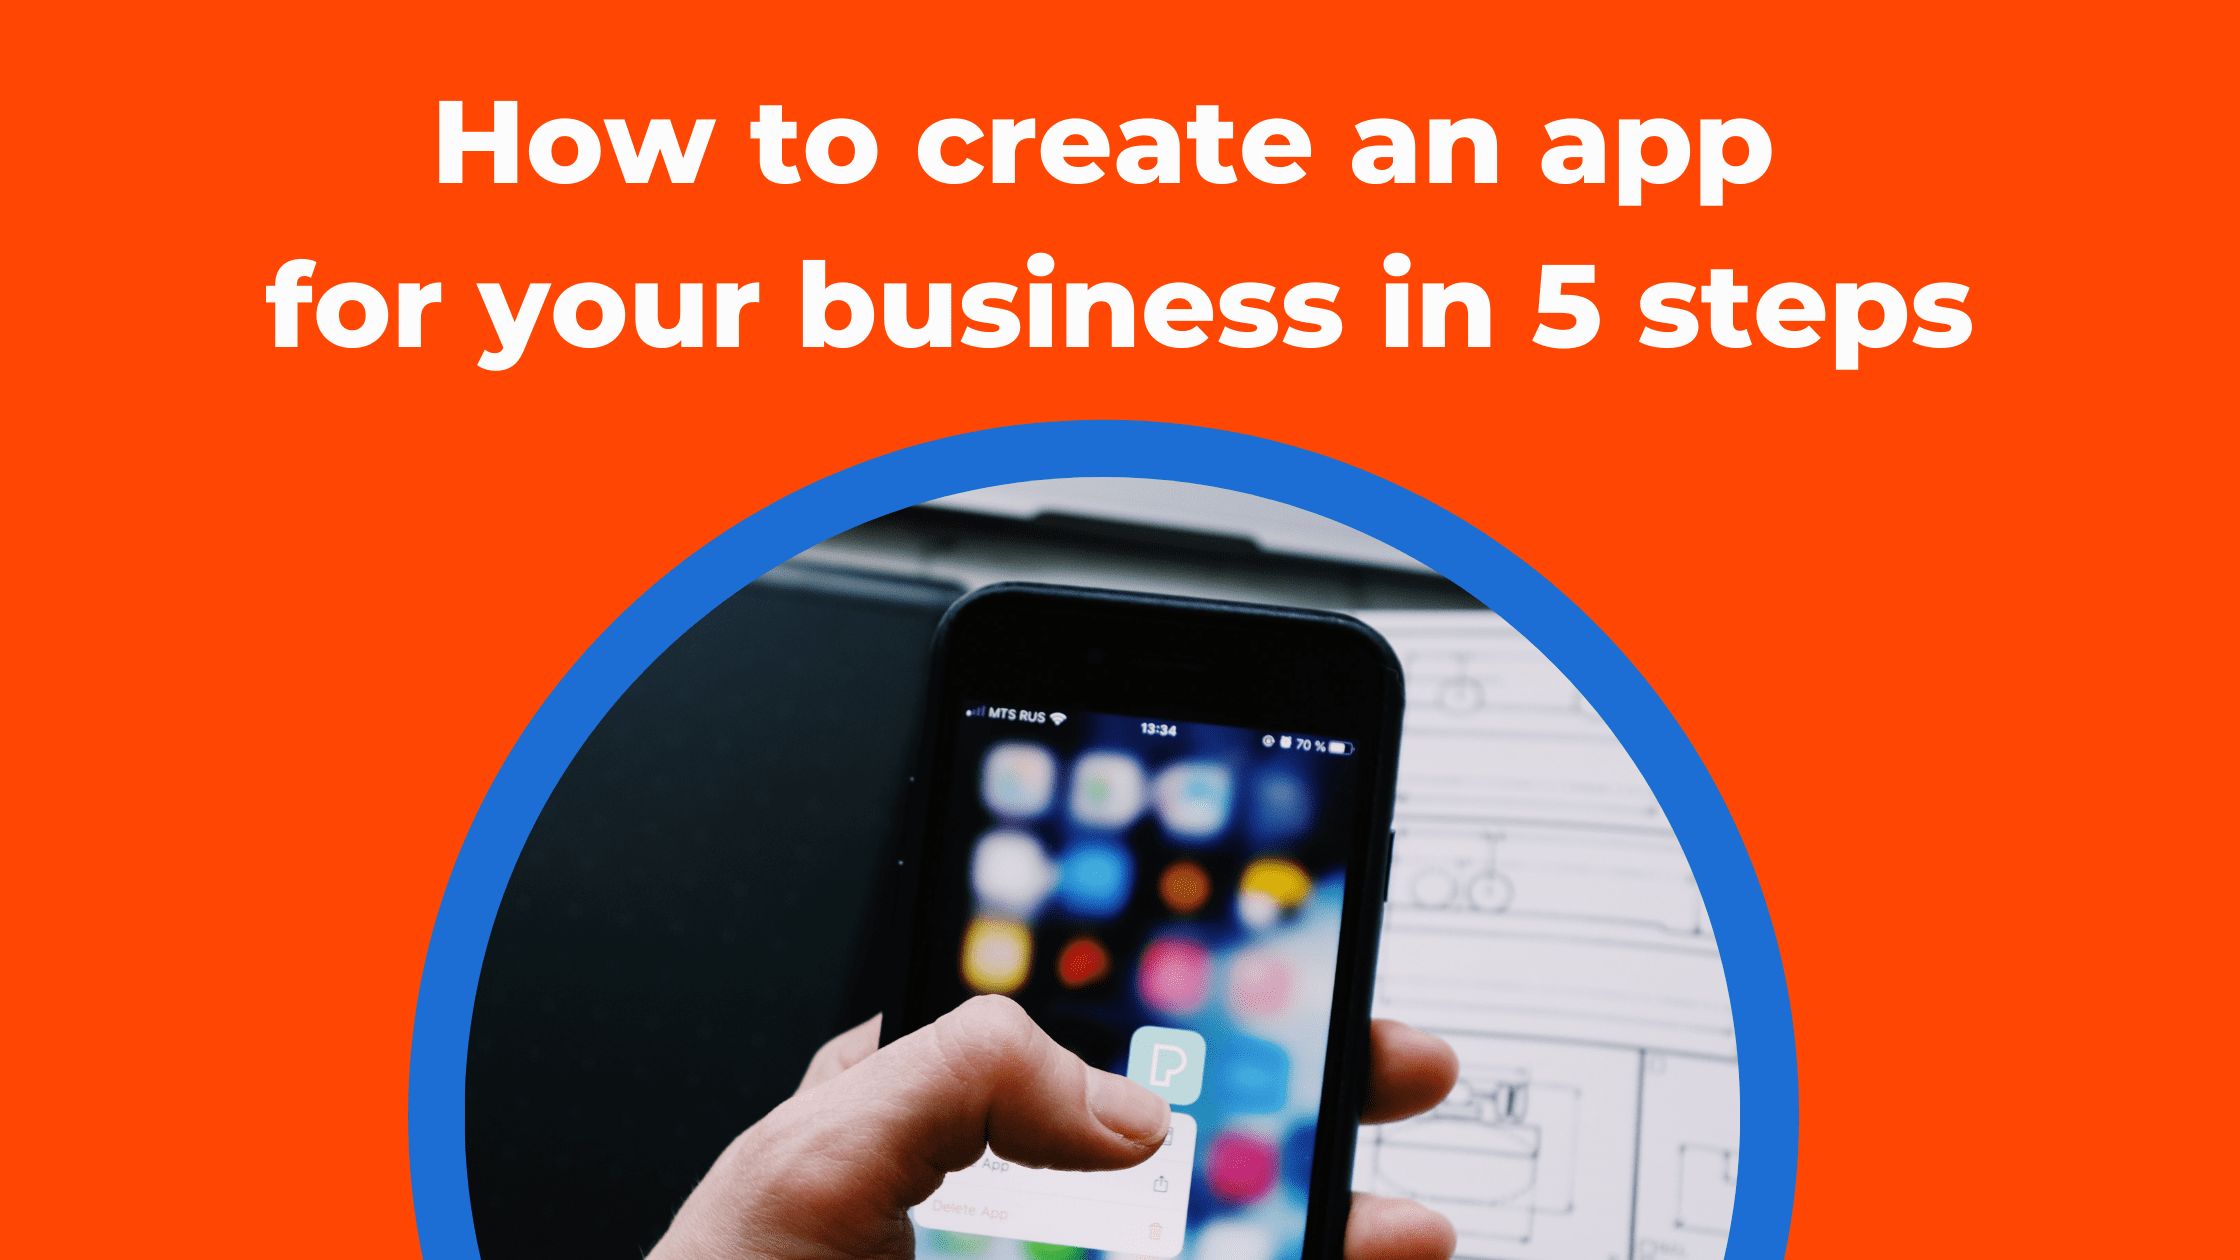 How to create an app for your business